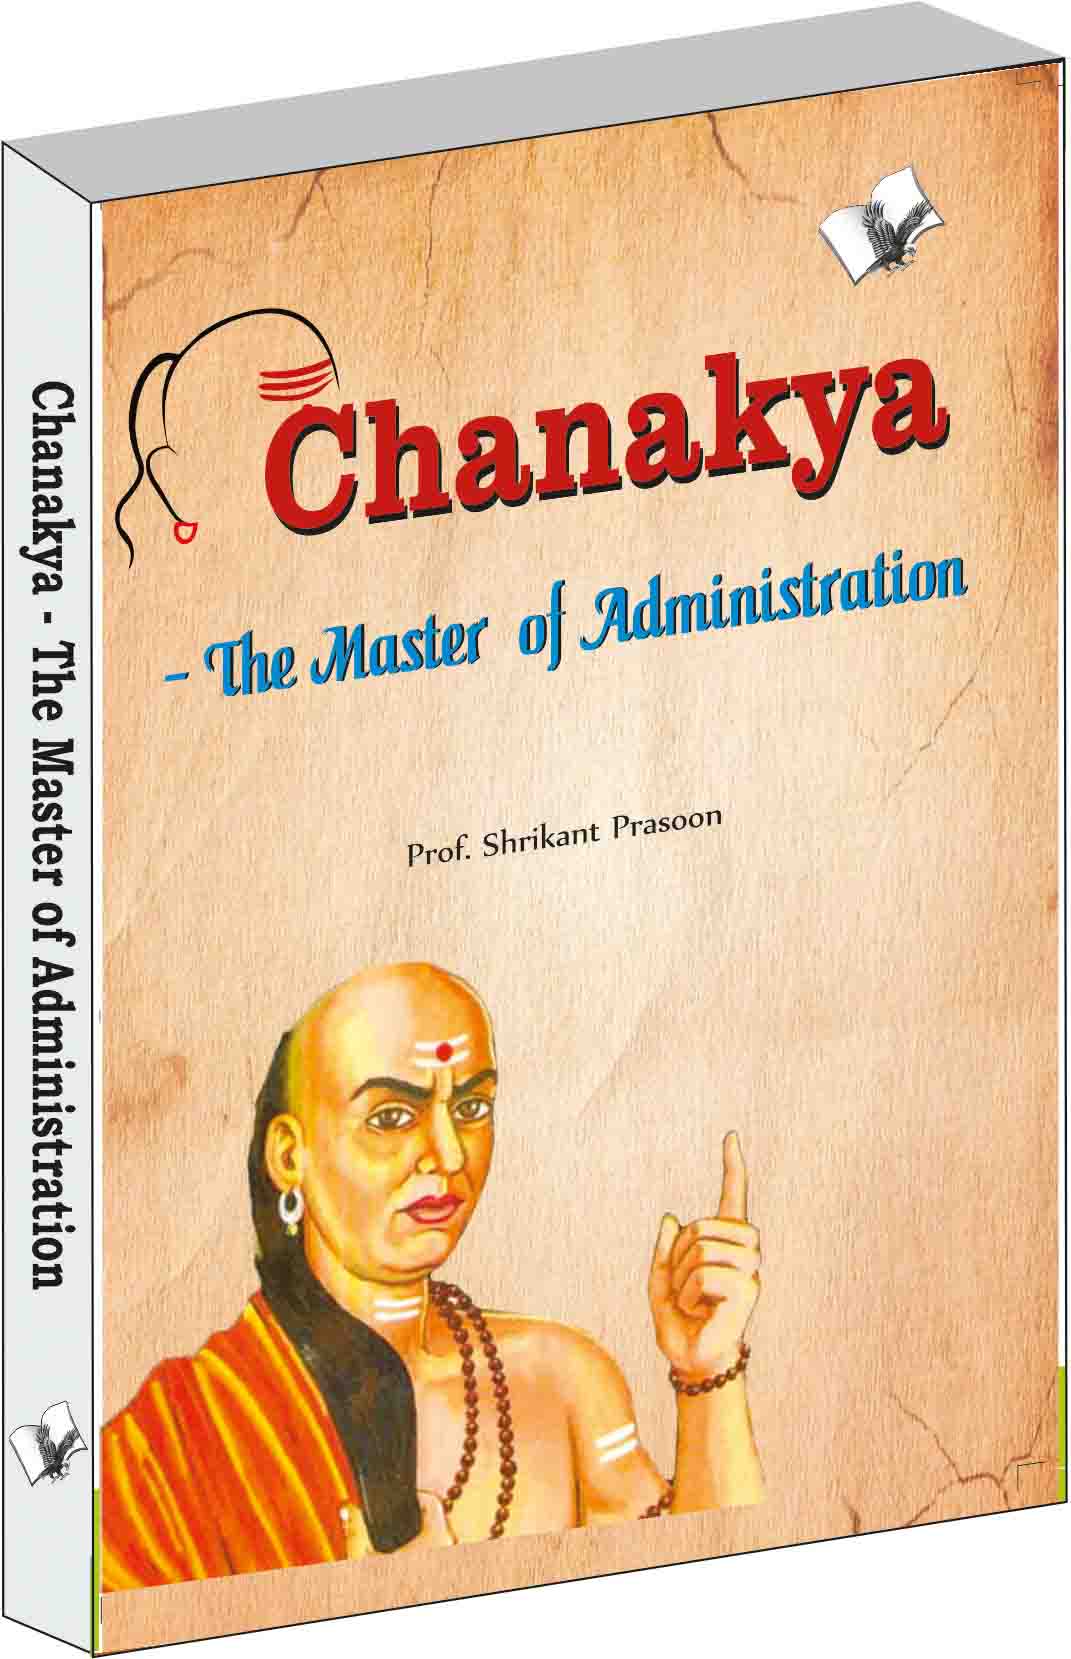 Chanakya - The Master of Administration-Subject of 1000s Ph.Ds